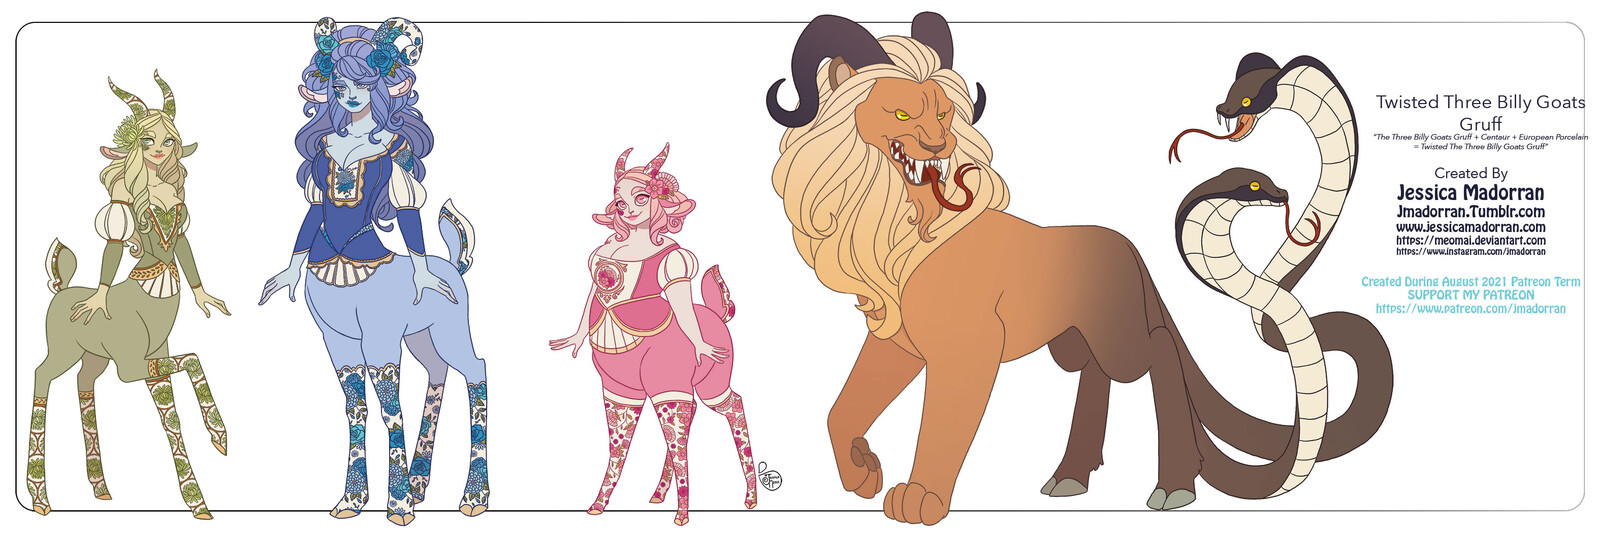 Patreon August 2021 - Twisted Three Billy Goats Gruff Character Line Up  